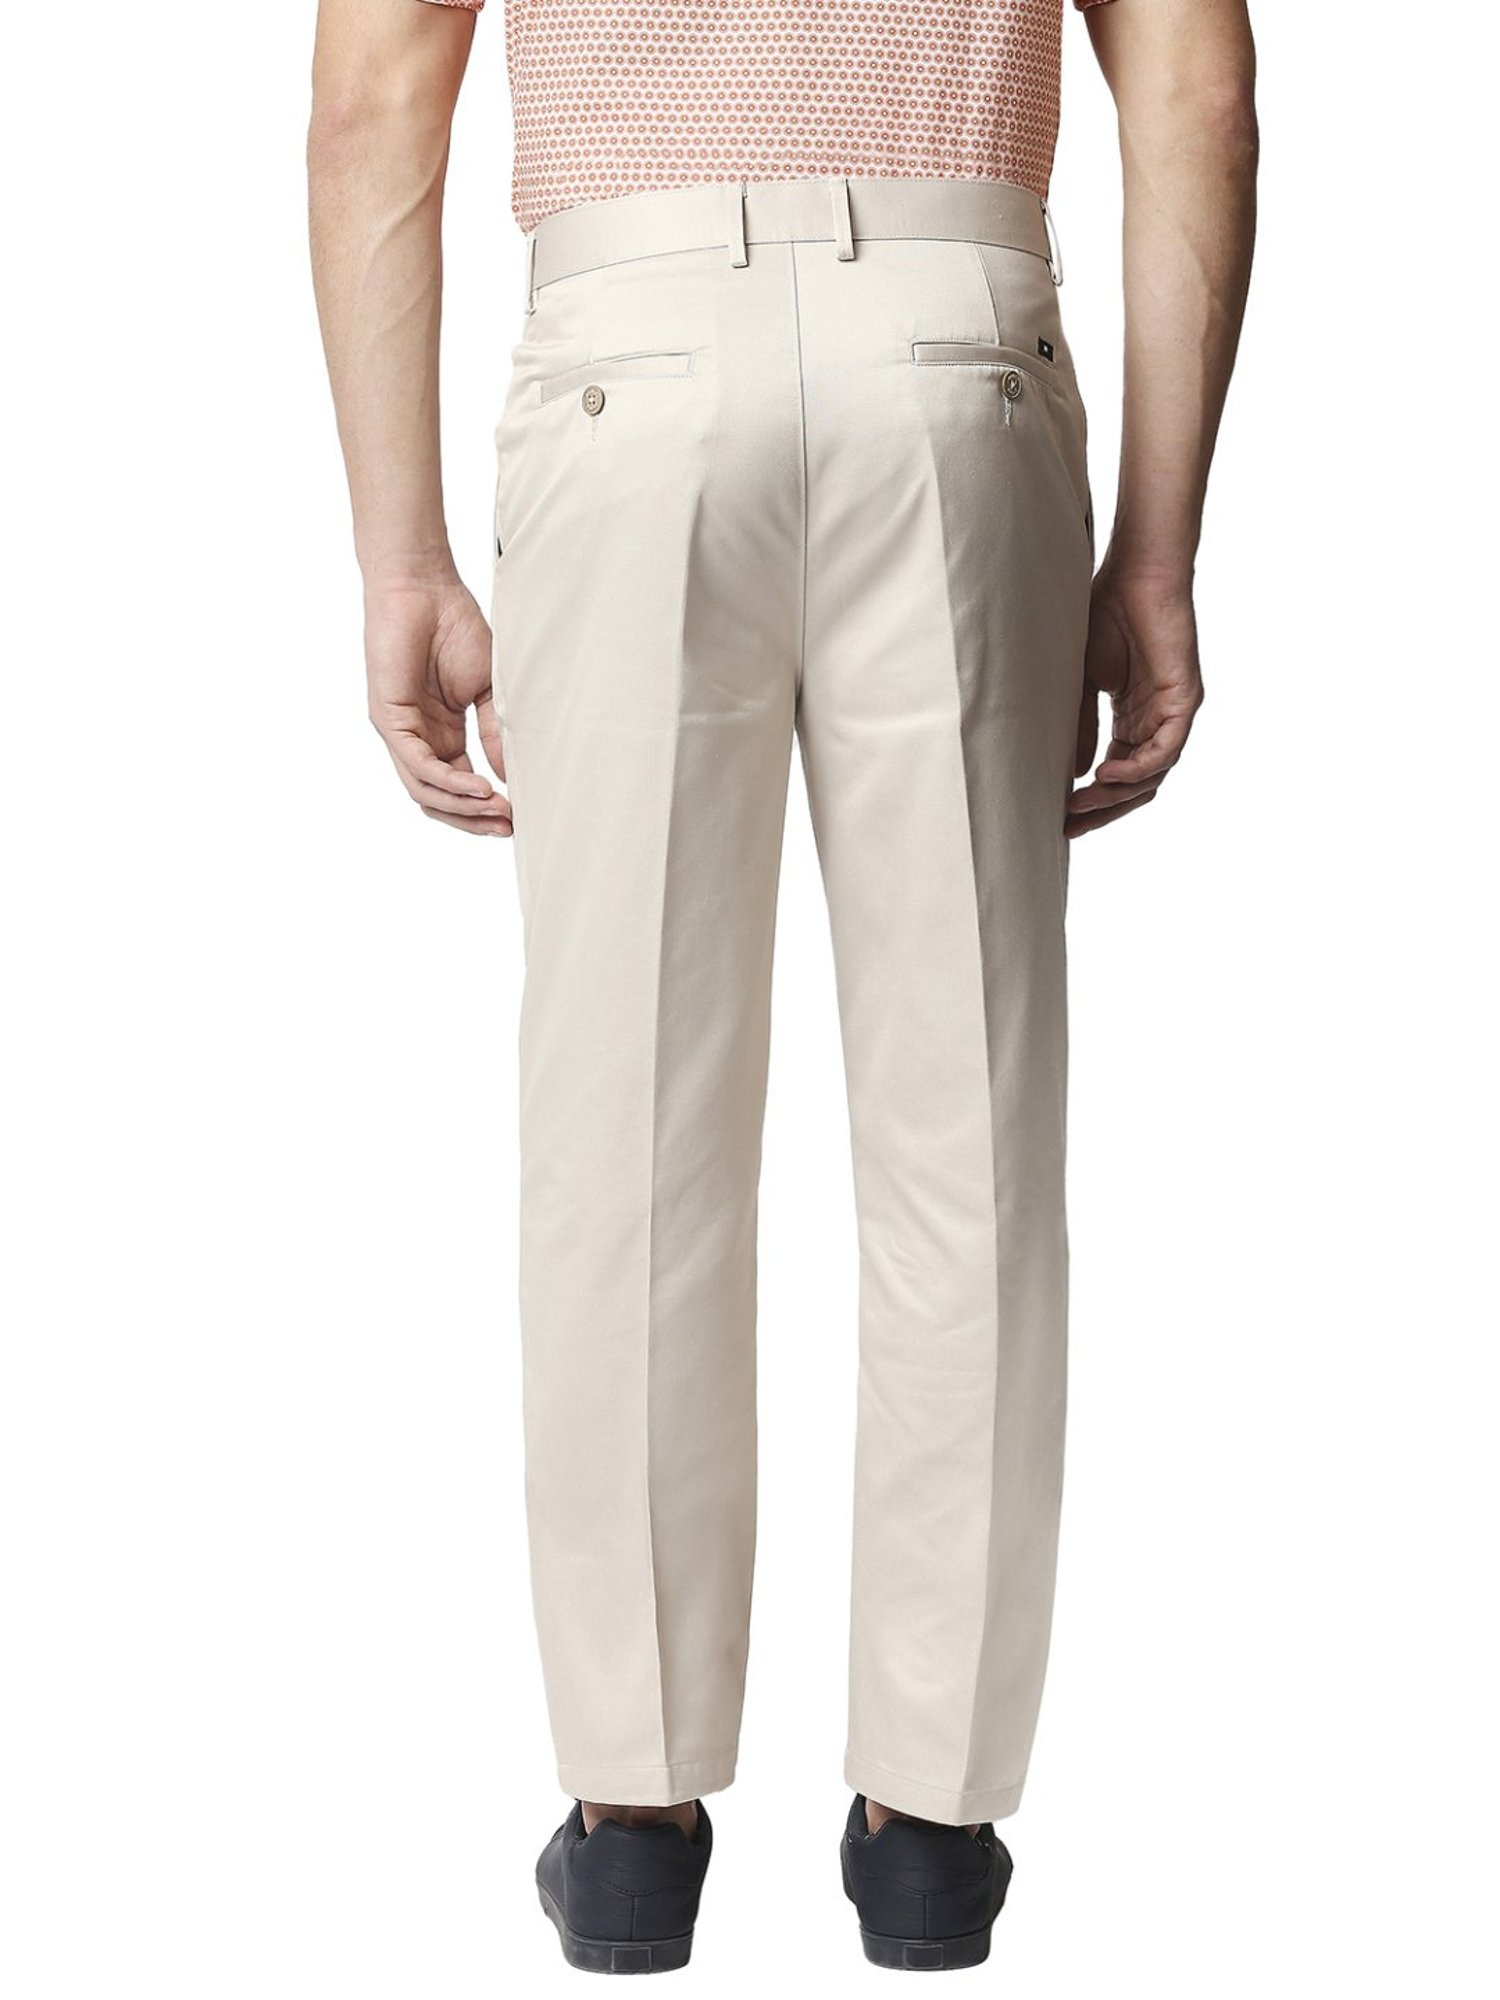 Likha White Comfort Fit Pants Buy Likha White Comfort Fit Pants Online at  Best Price in India  Nykaa